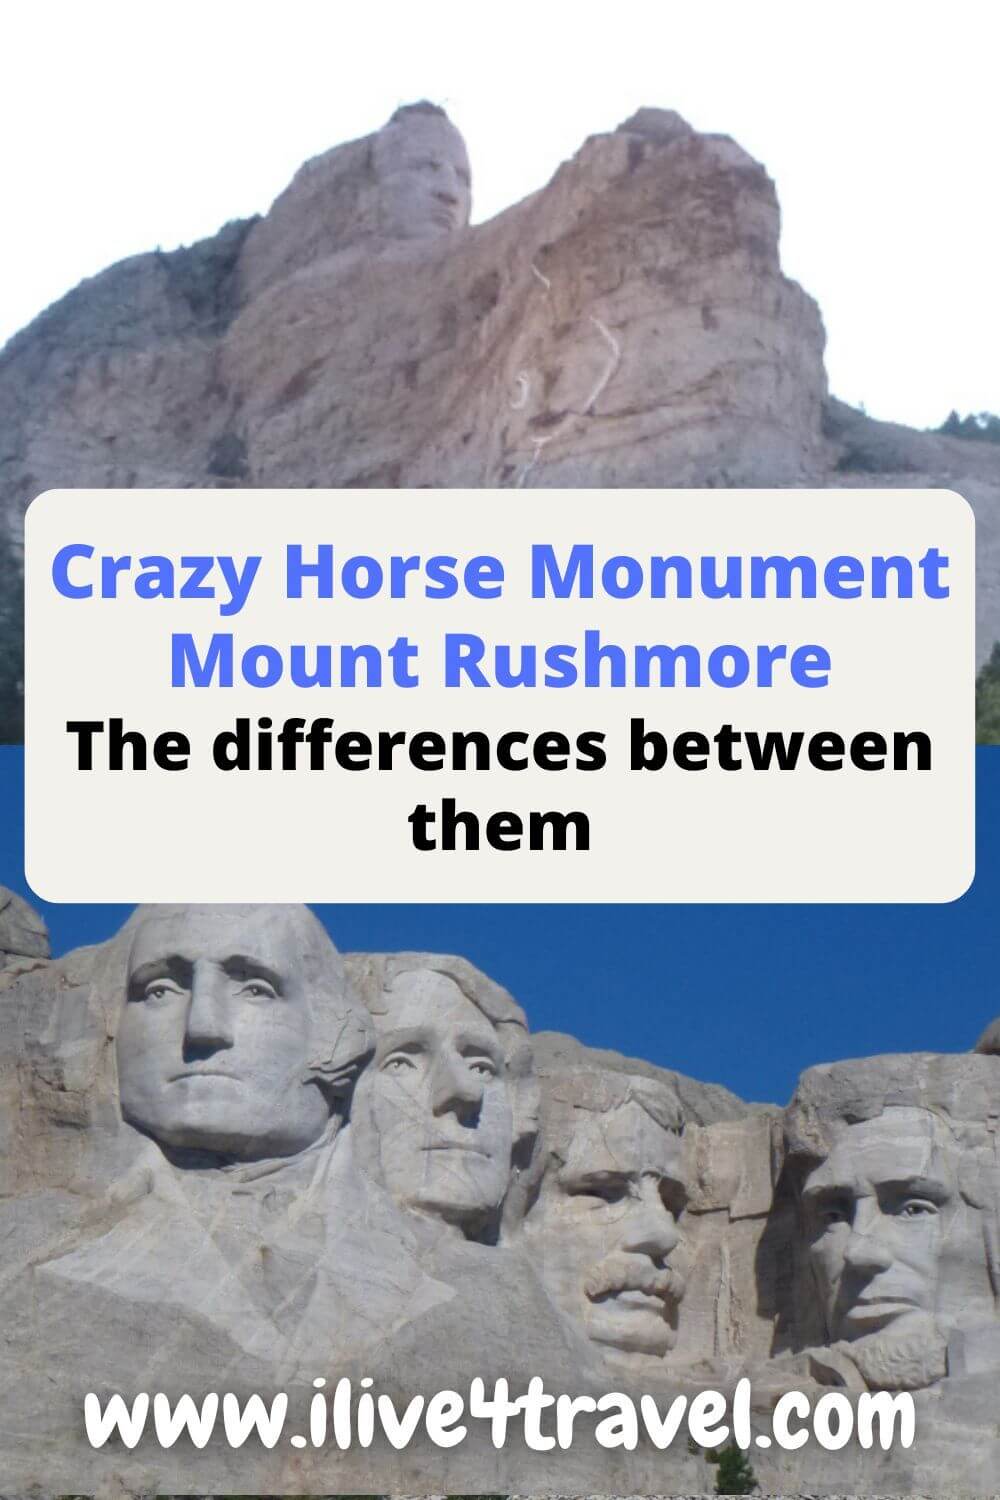 a pin created by i live for travel about Crazy Horse vs Mount Rushmore and the differences between them, showing 2 pictures, the top picture has a face carved into a mountain and the bottom picture has four faces carved into a mountain